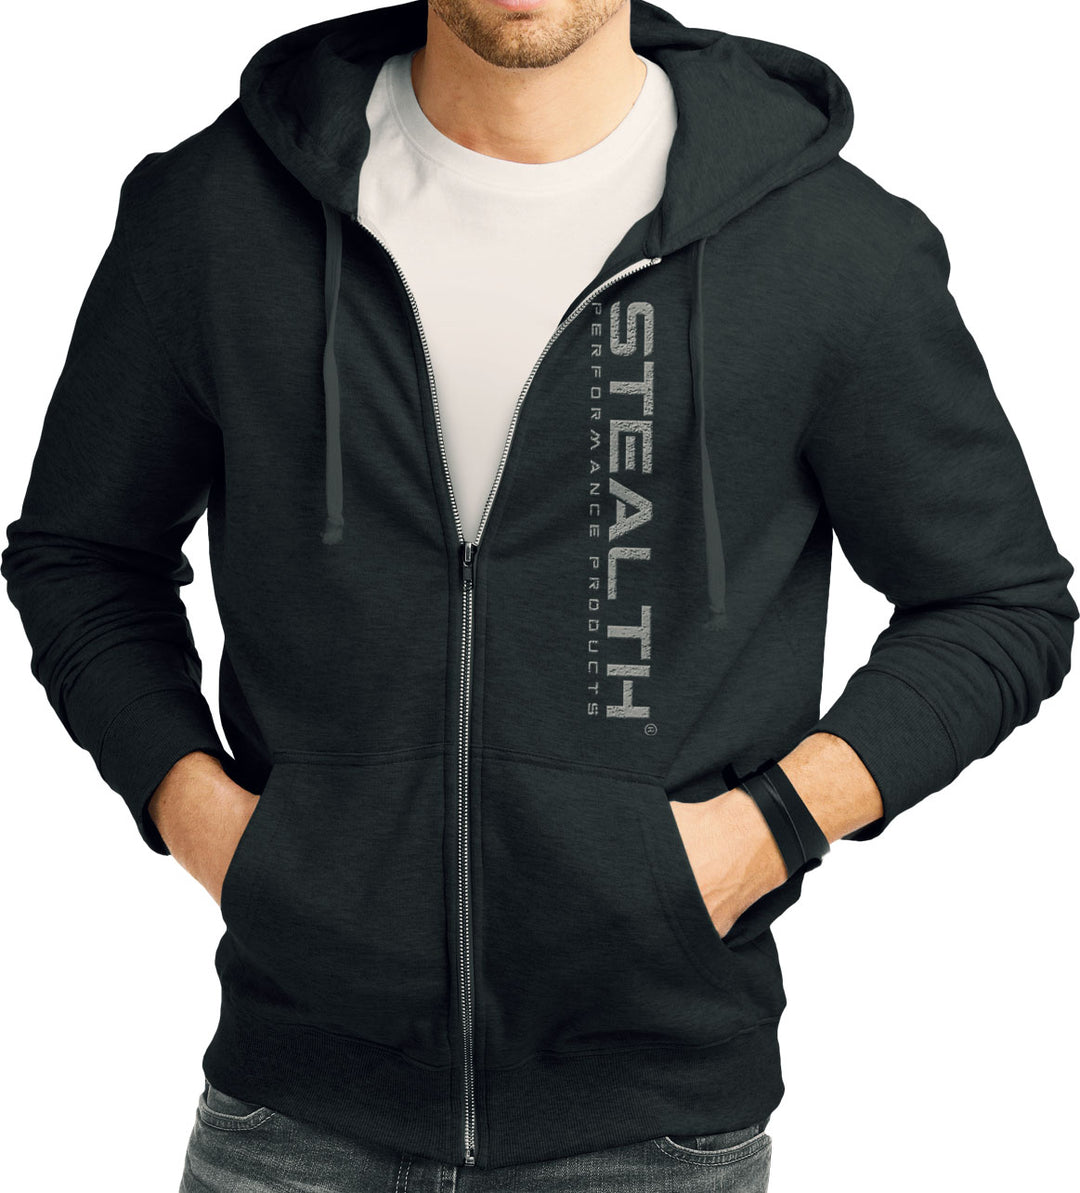 Stealth Zip Sweatshirt-Stealth Performance Products